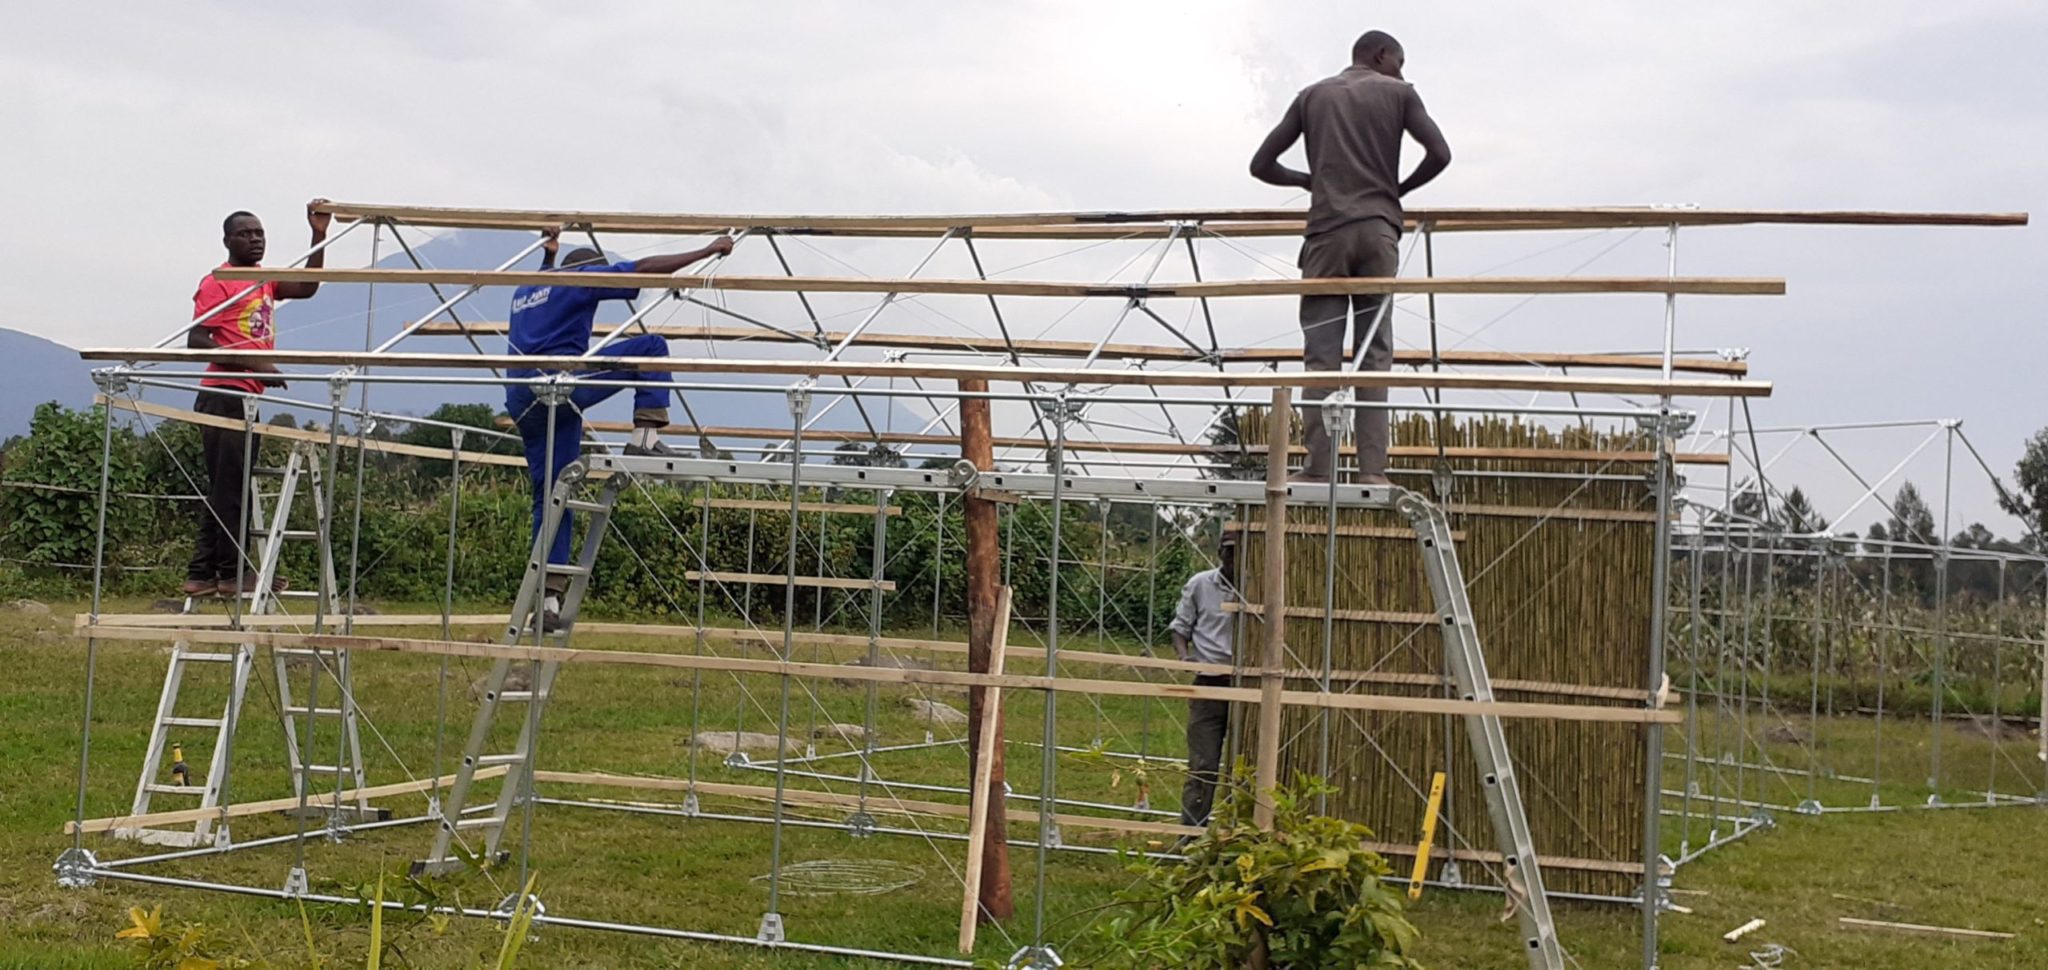 Testing the Structure with partners in Rwanda